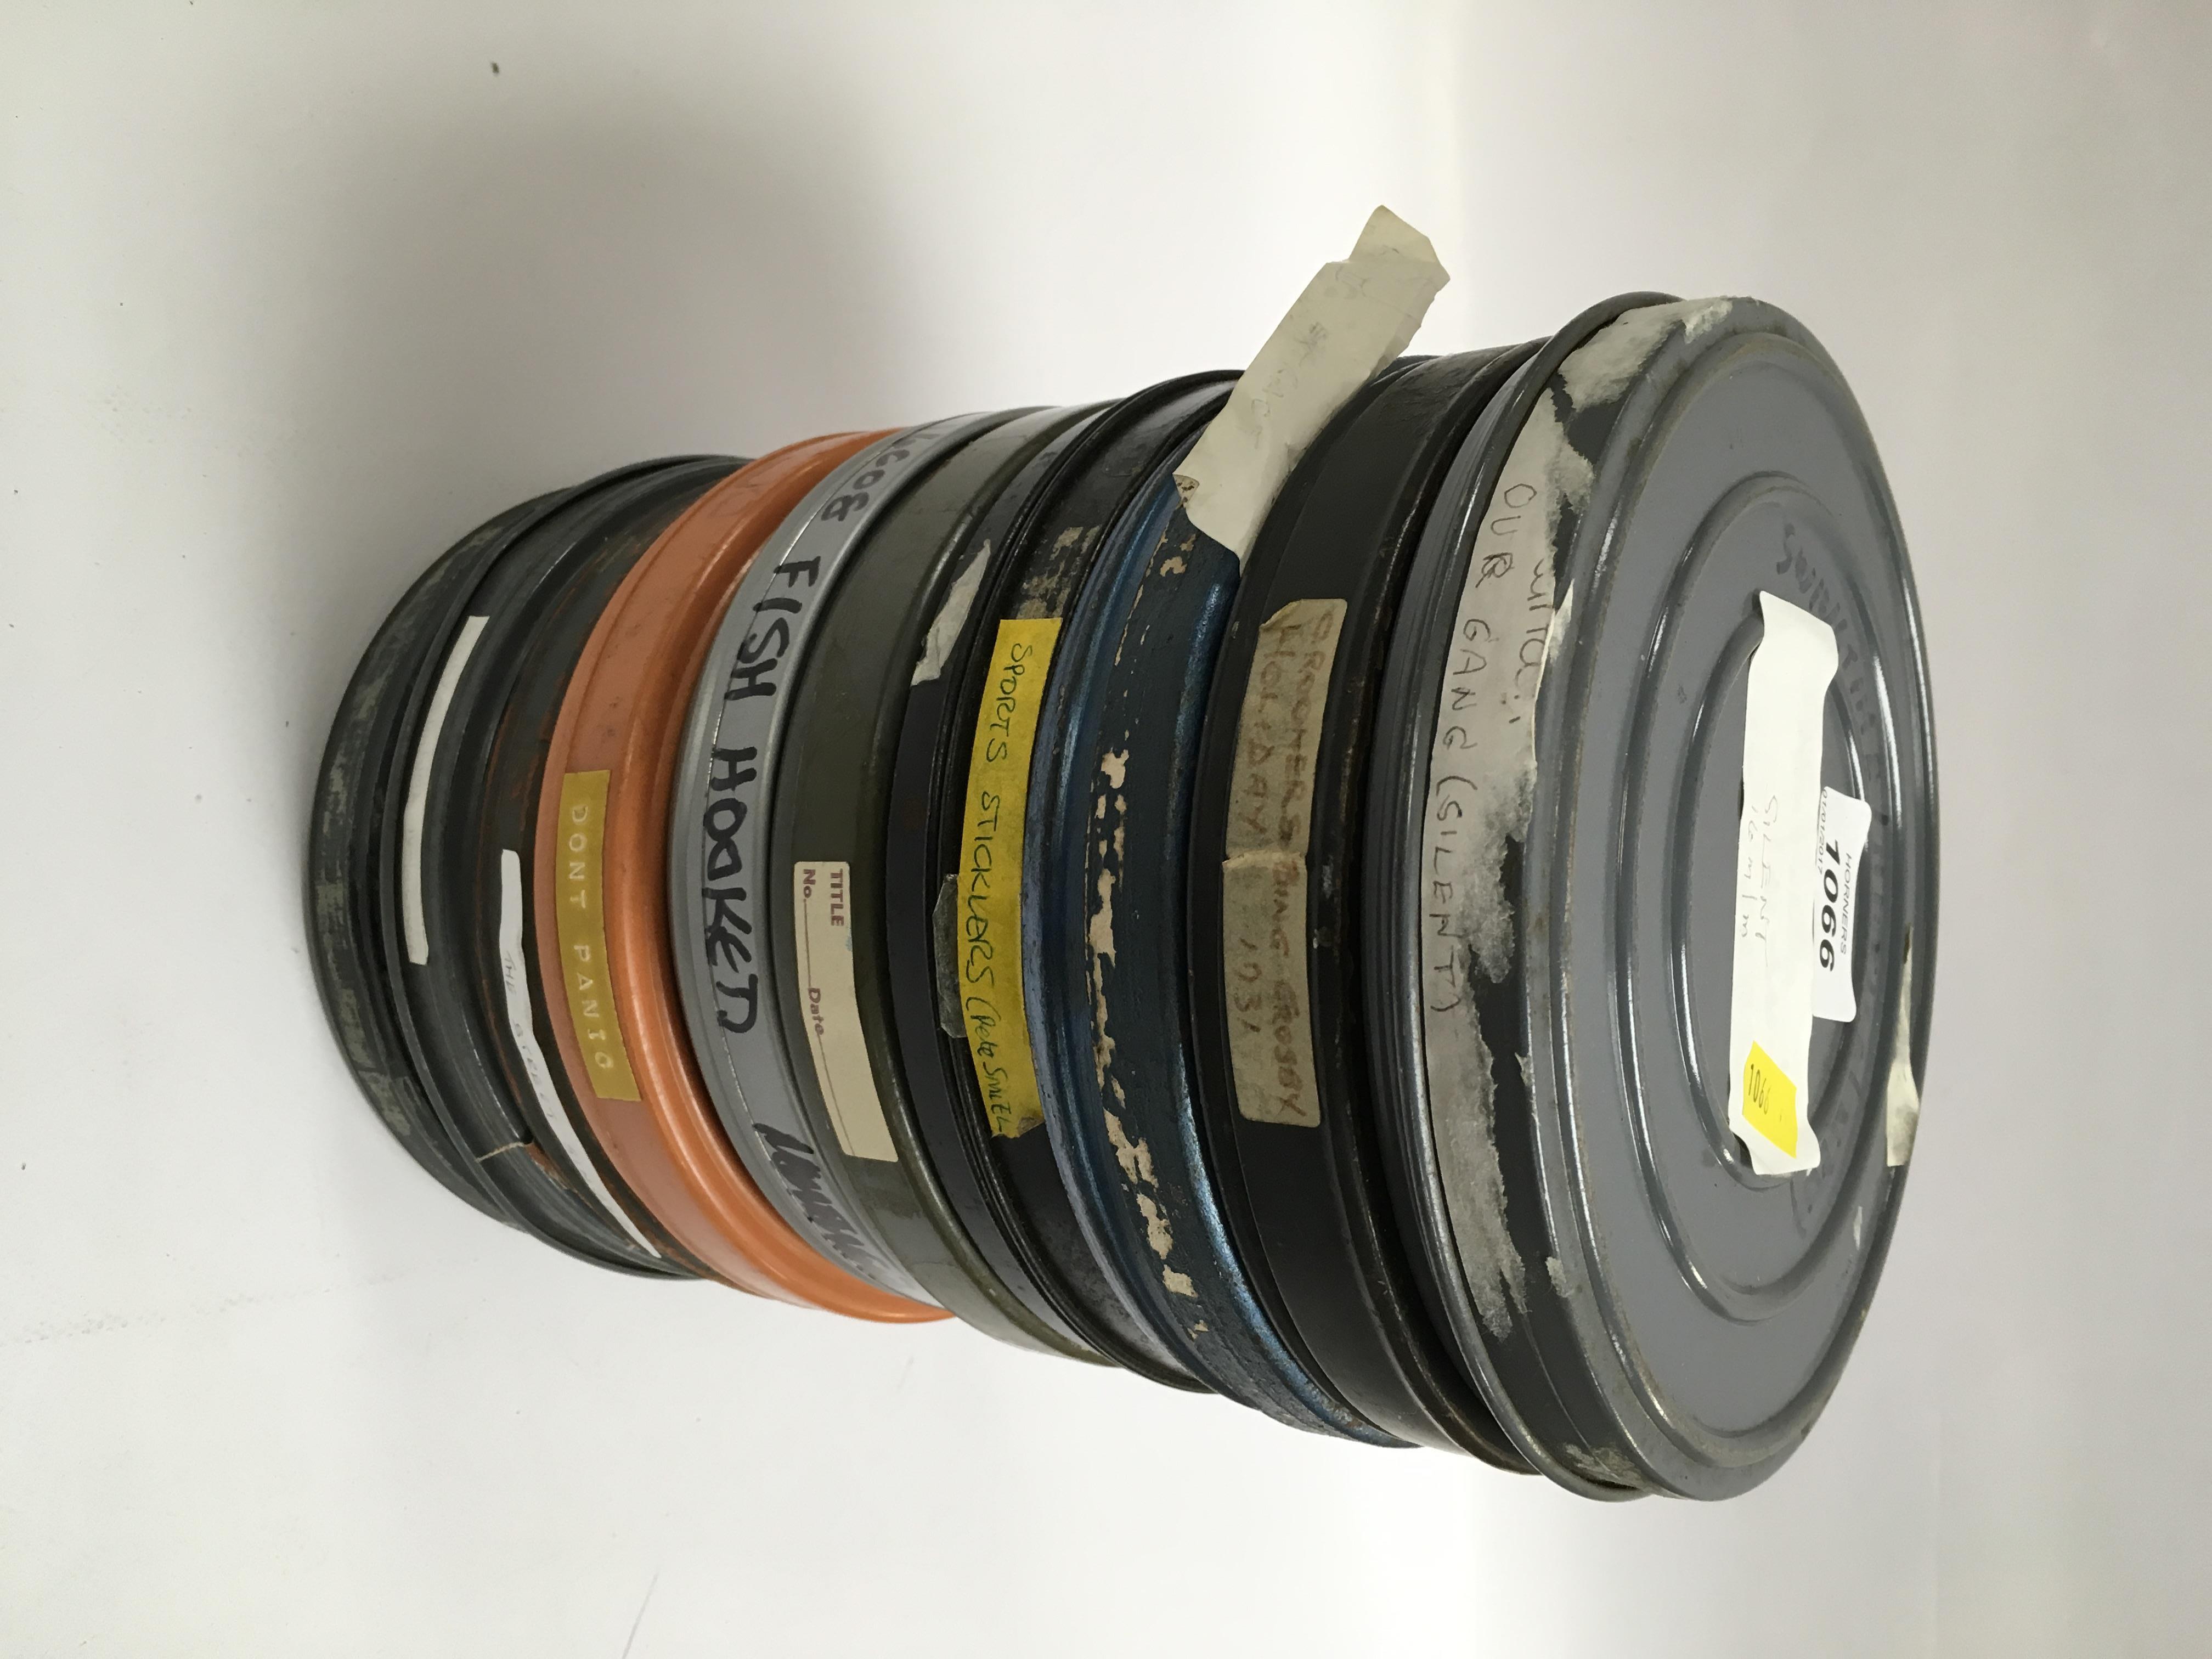 A COLLECTION OF 10 VINTAGE FILMS, IN CANS TO INCLUDE - THE JET CAGE, SYLVESTER AND TWEETY,